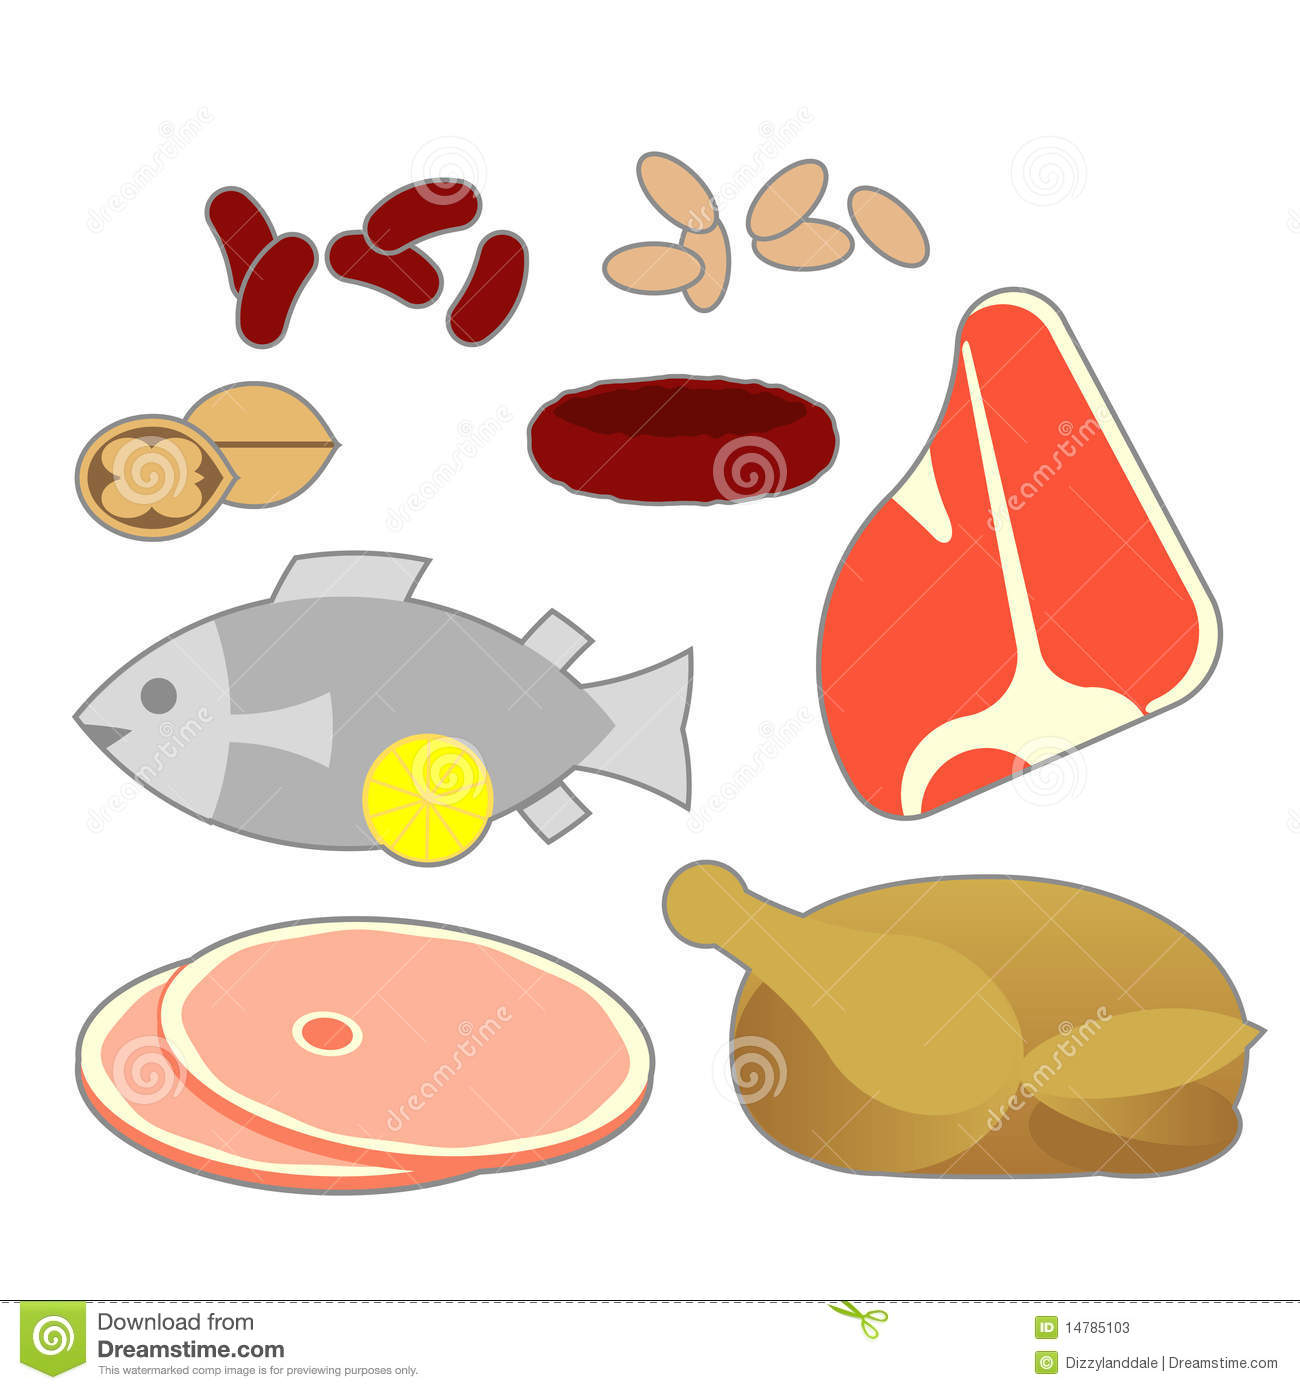 Of The Main Meat Fish Protein Foods In The New Foos Pyramid